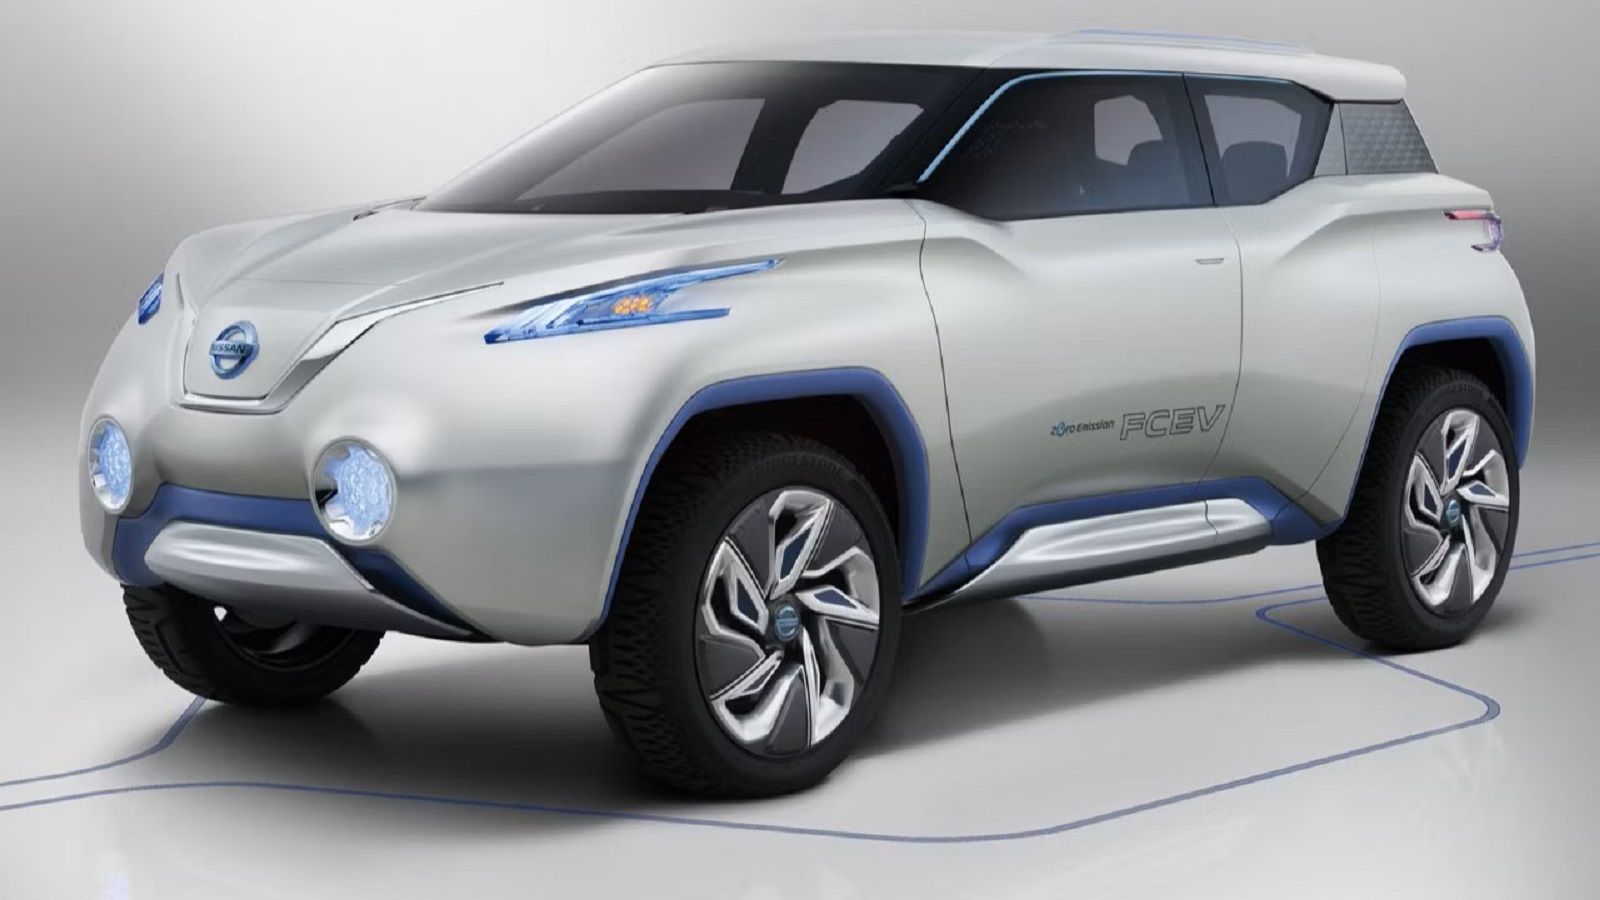 A parked Nissan Terra SUV Concept